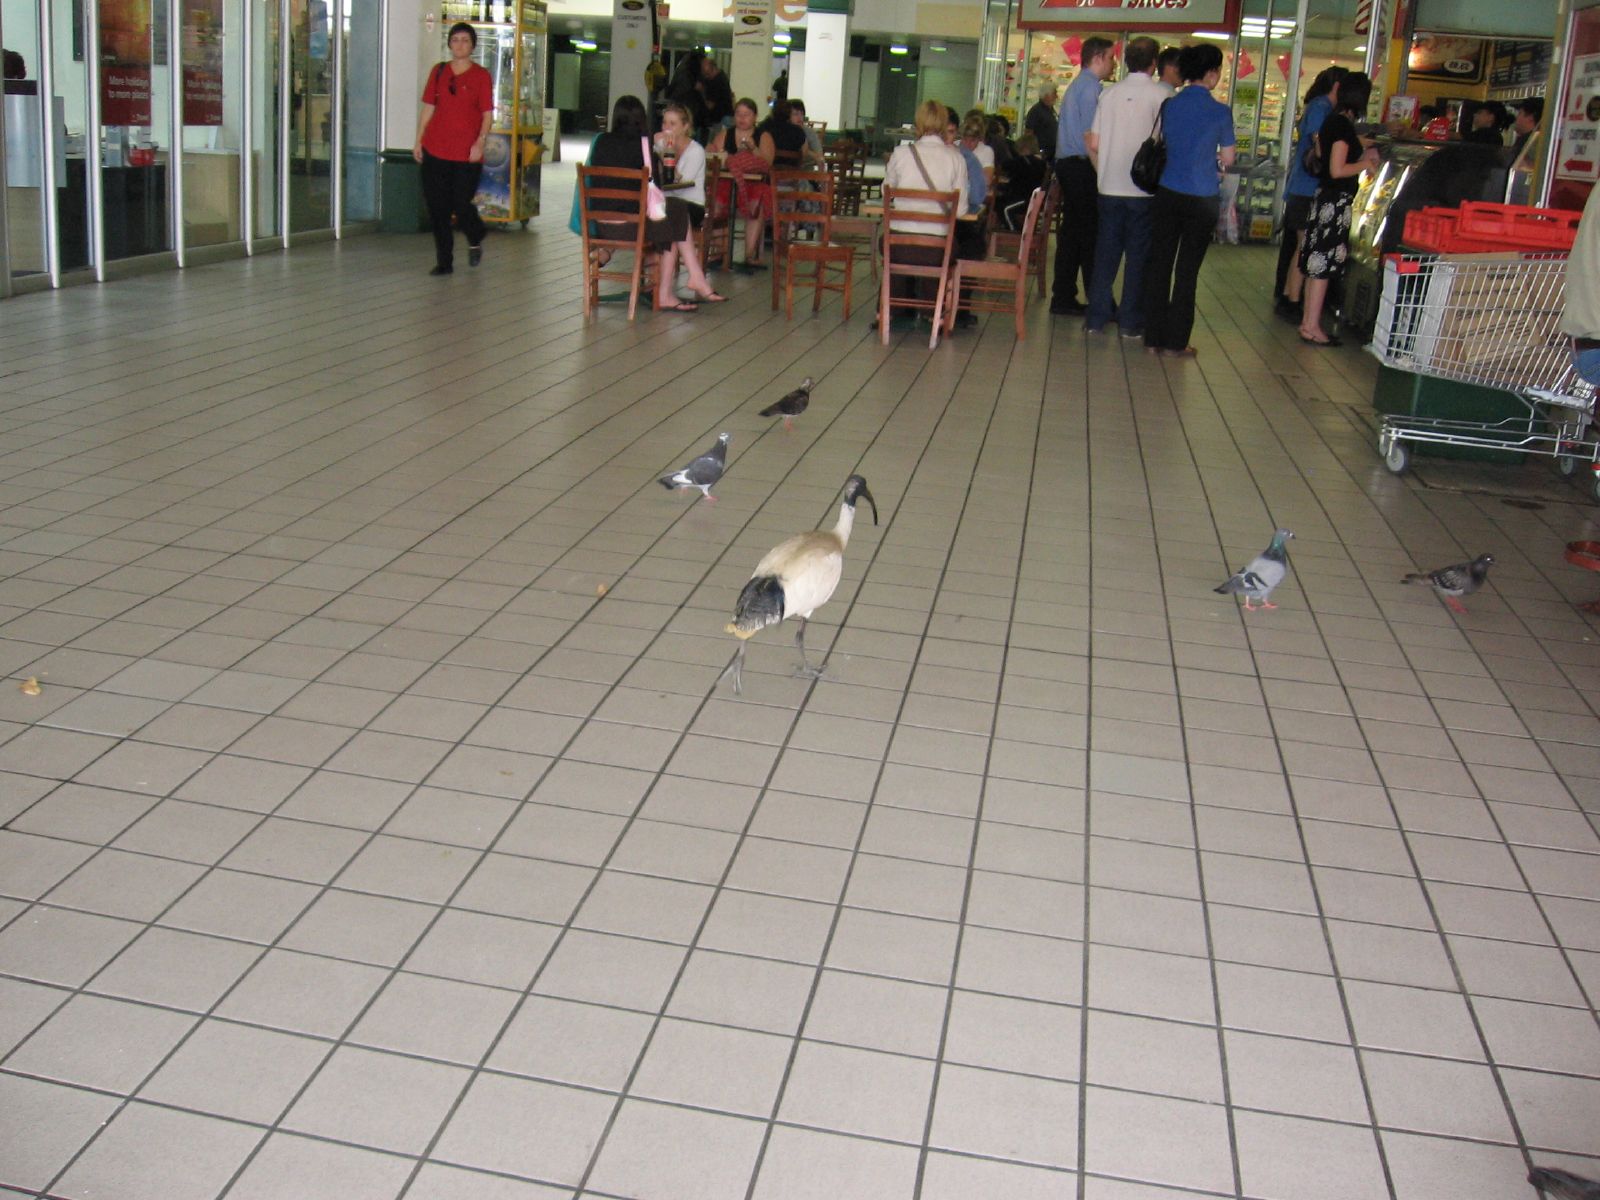 birds sitting on the tiled floor in the middle of a mall